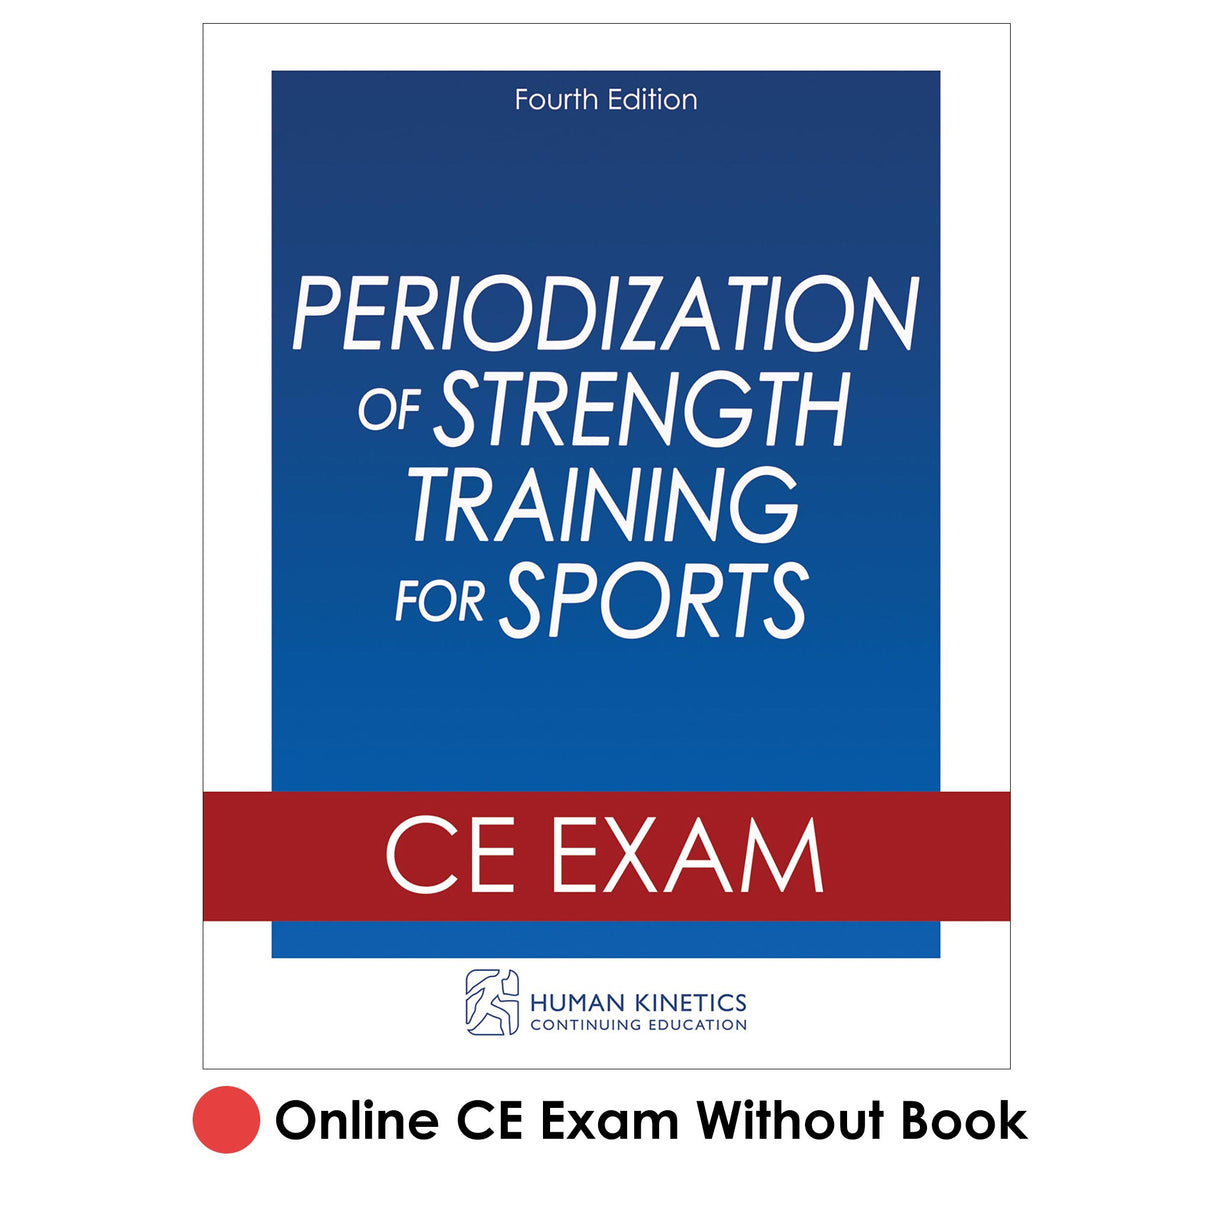 Periodization of Strength Training for Sports 4th Edition Online CE Exam Without Book